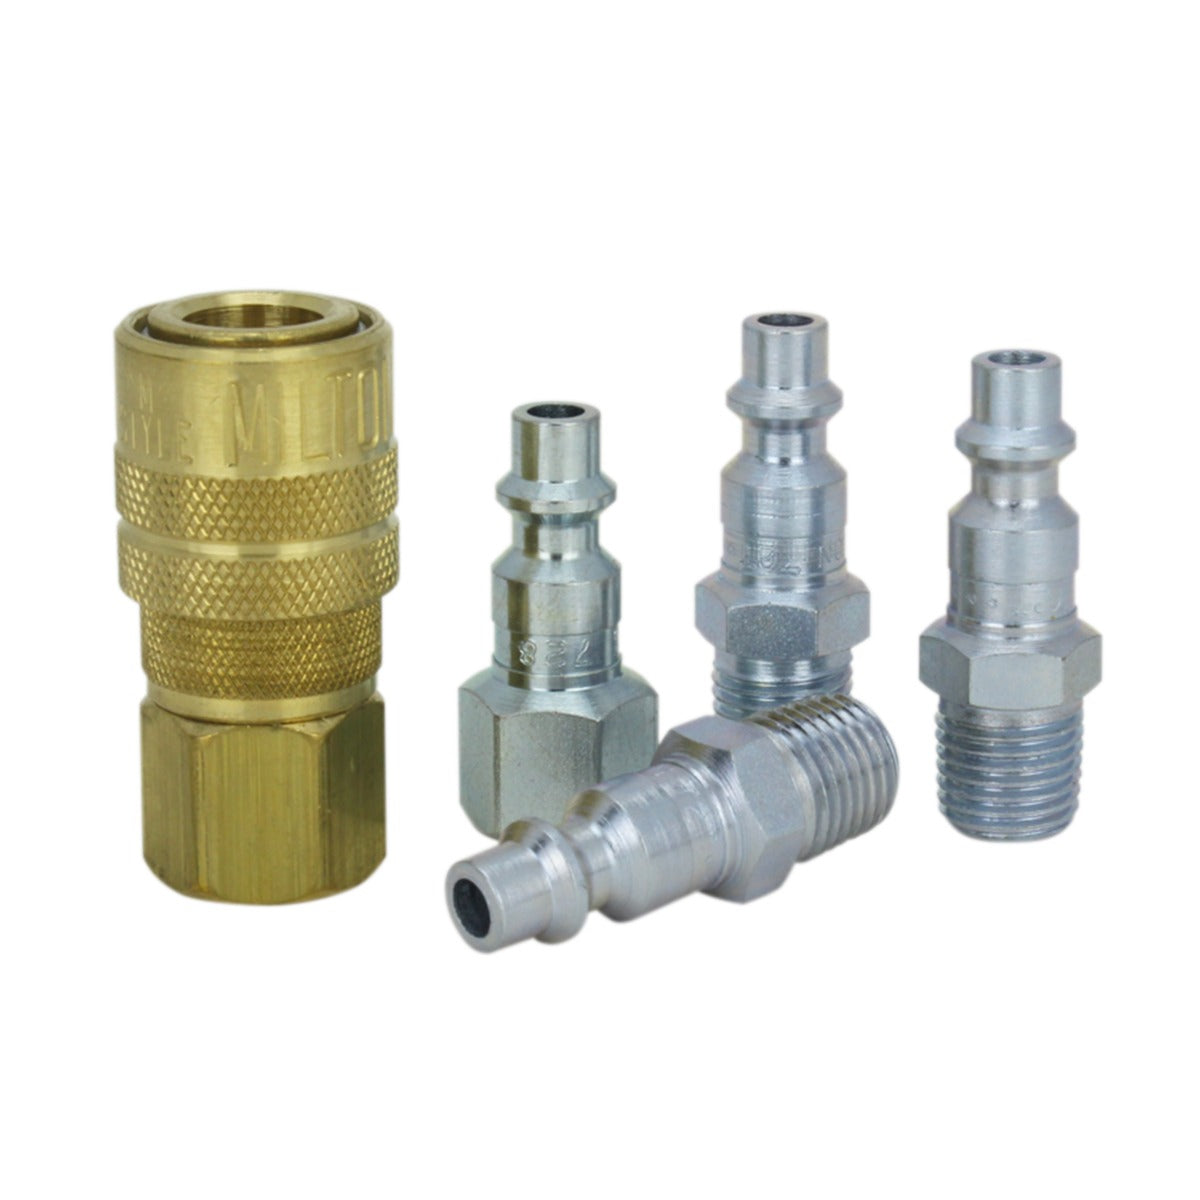 Coupler and Plug Kit for Air Tools, M-STYLE®, 1/4